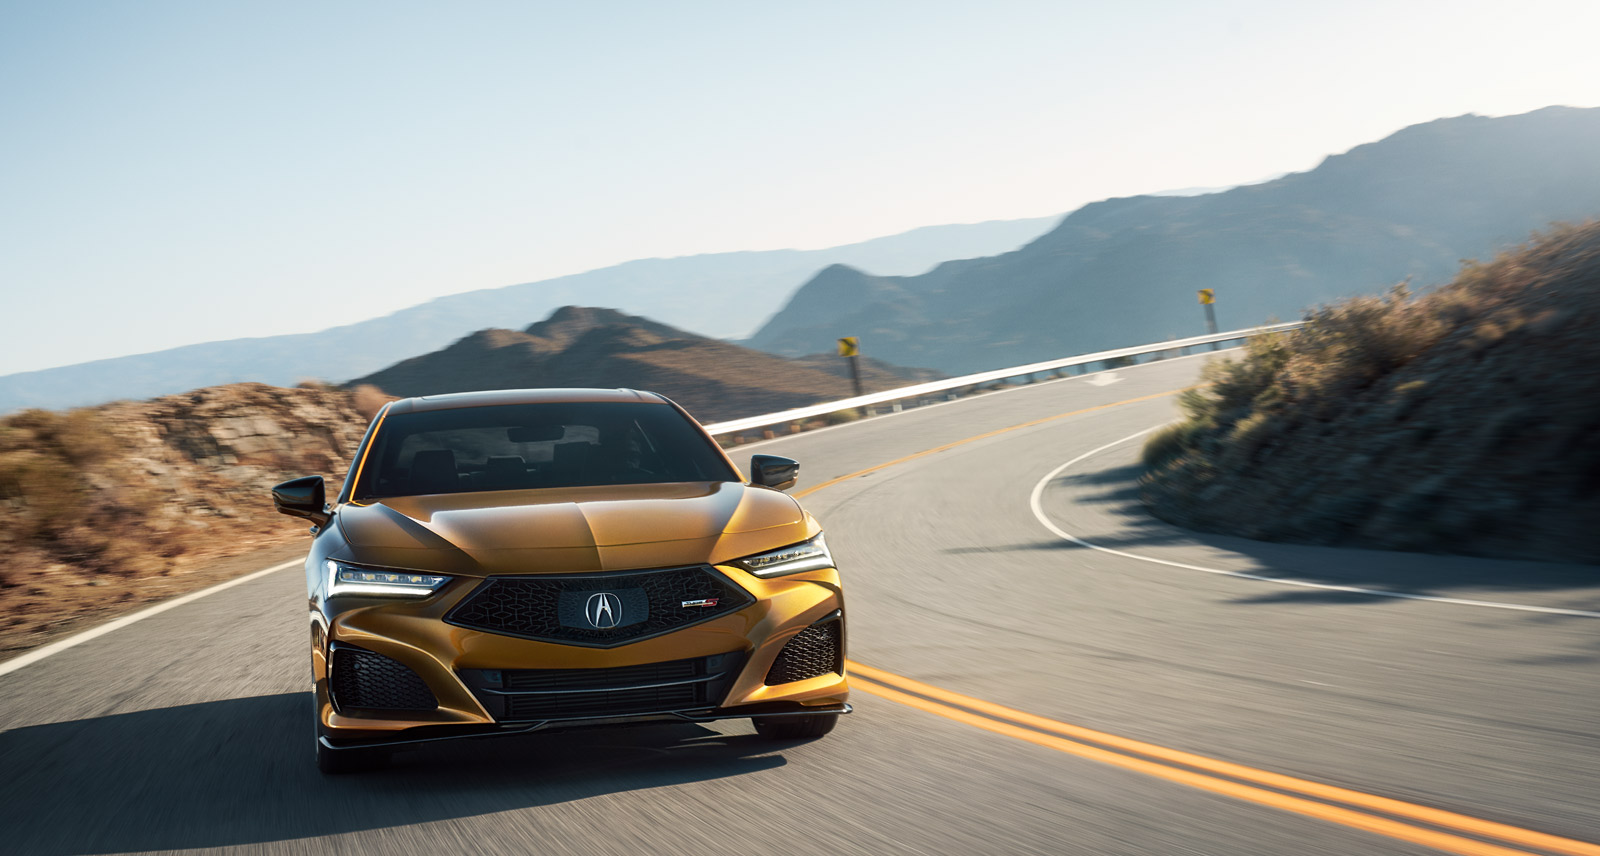 Acura’s Most Powerful Sedan Ever, the TLX Type S, is Here to Make Your Summer Great